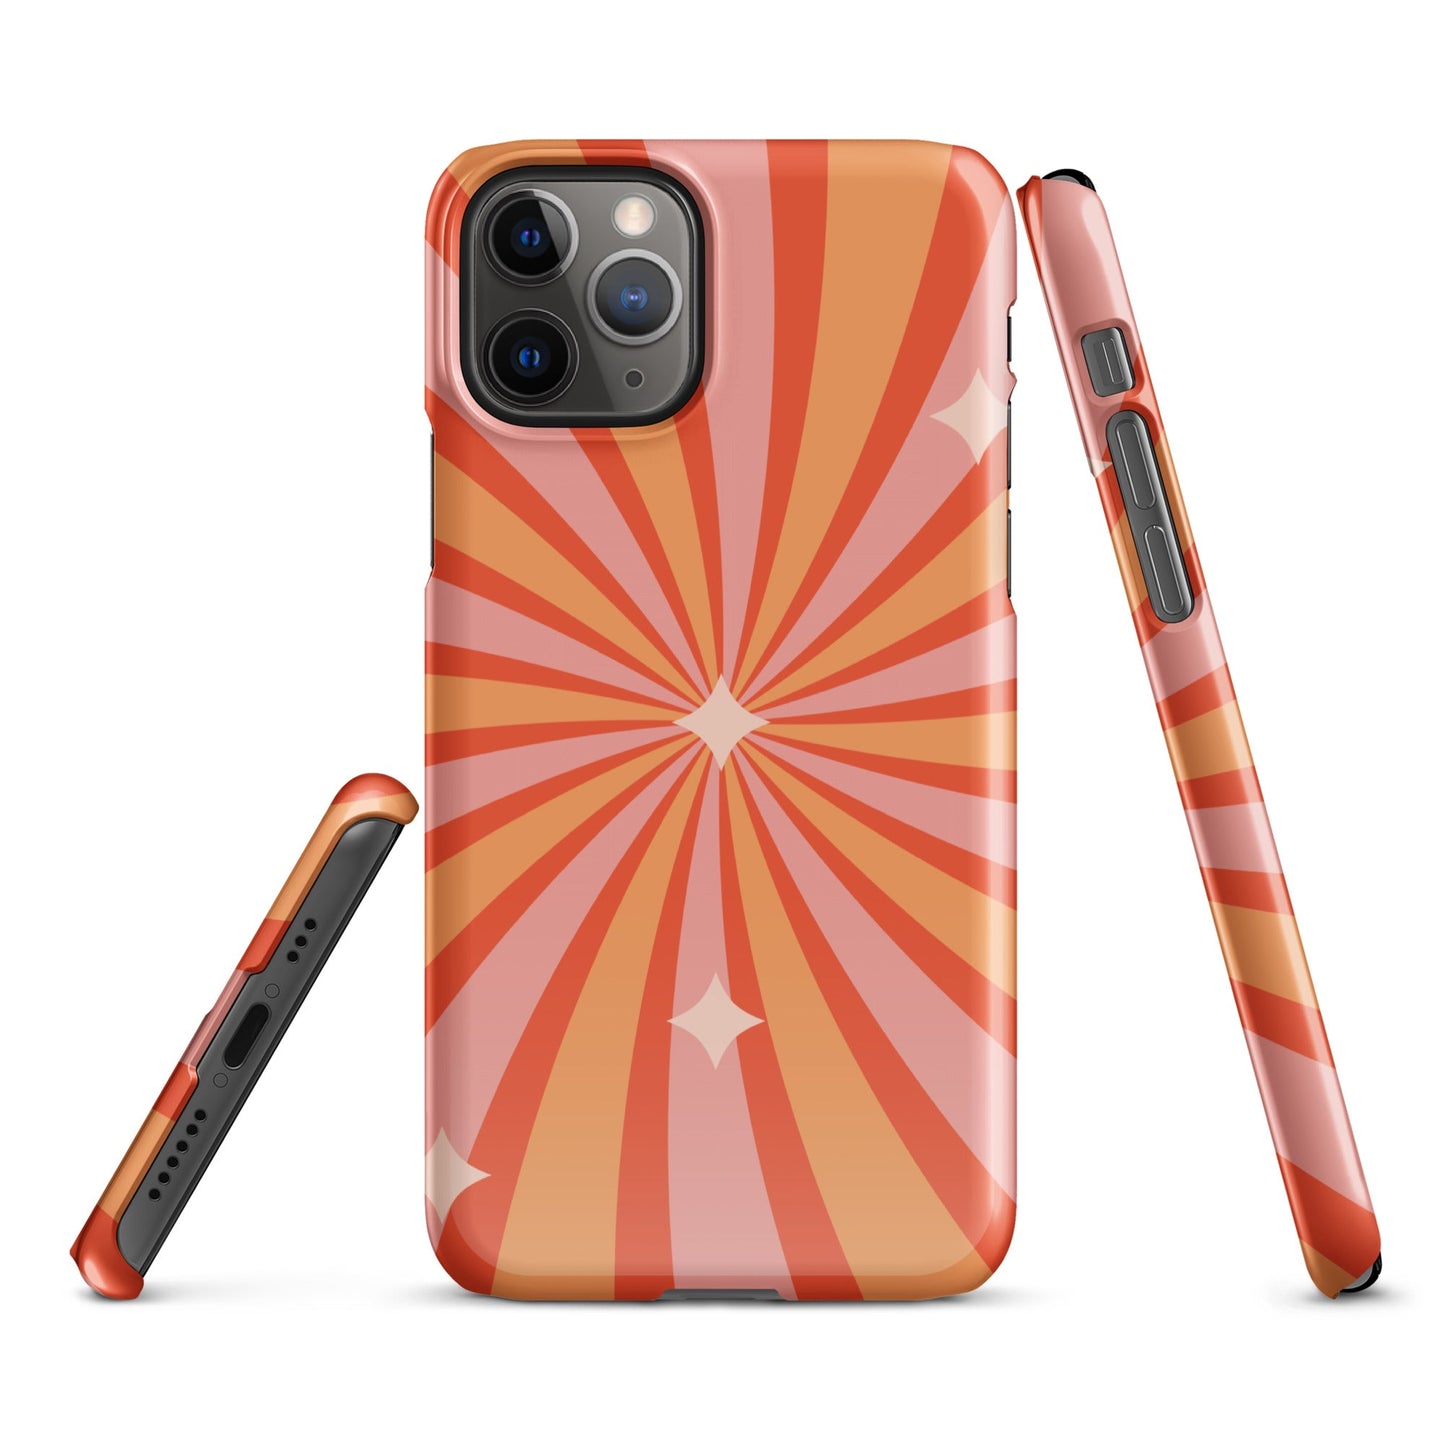 Groovy Snap Case for iPhone - Retro Chic Protection and Style